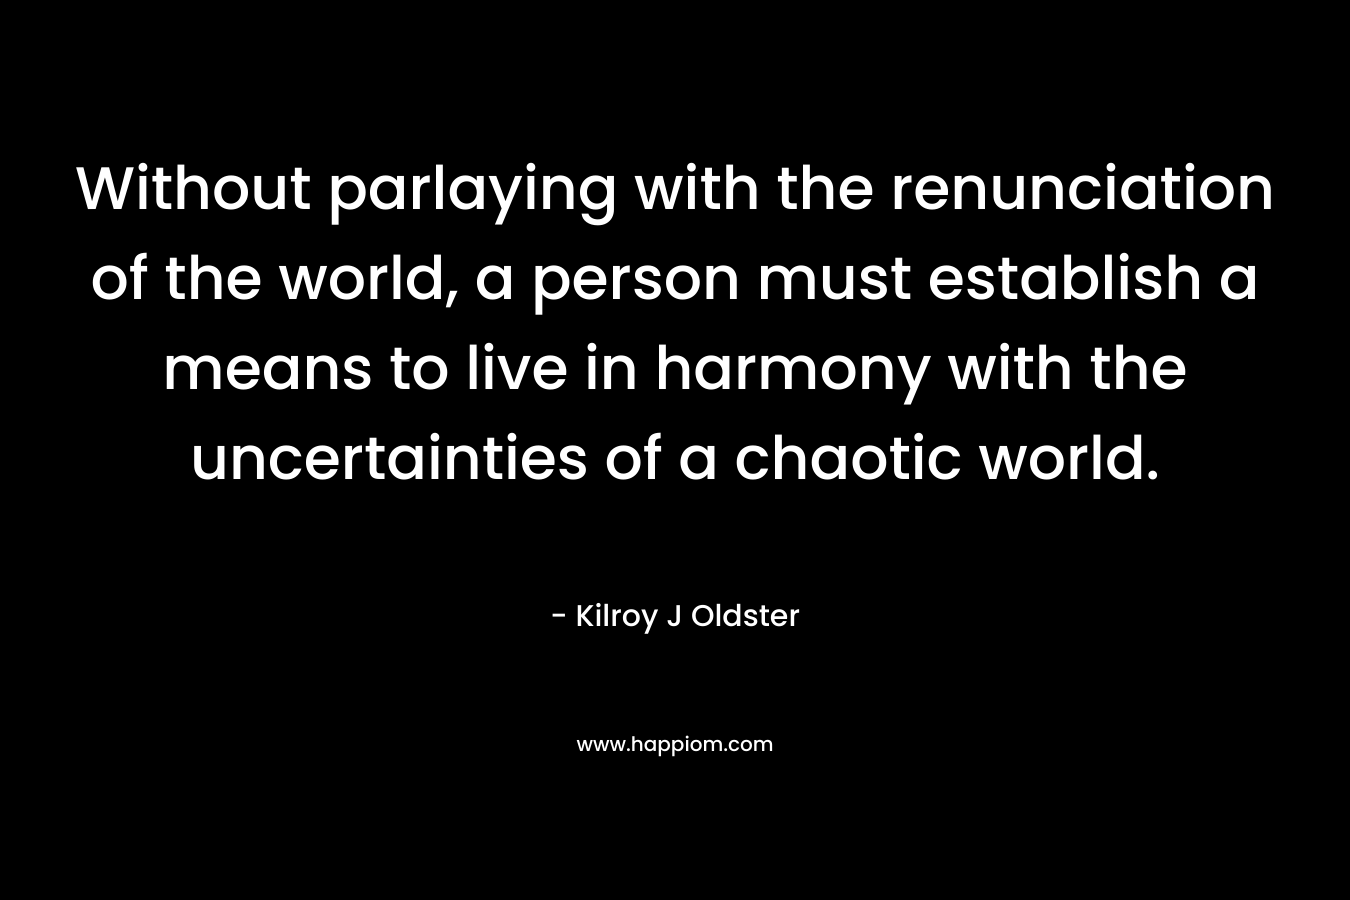 Without parlaying with the renunciation of the world, a person must establish a means to live in harmony with the uncertainties of a chaotic world.